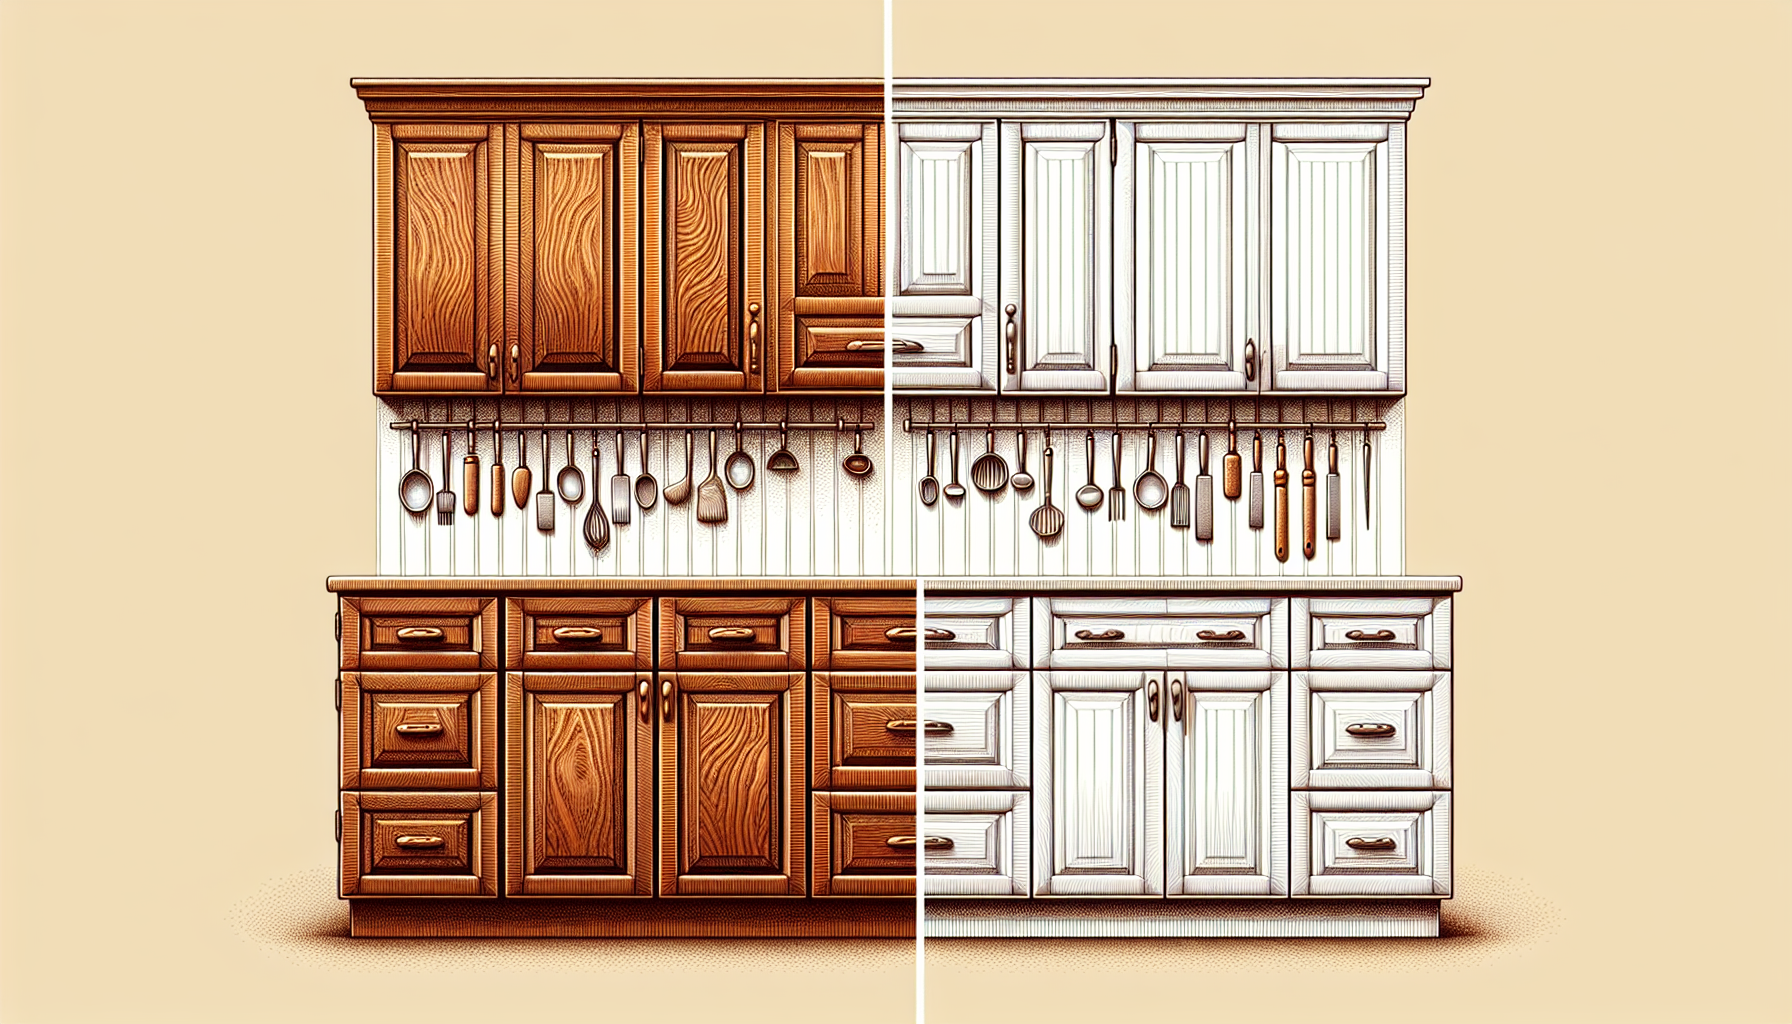 Illustration of traditional and modern shaker style kitchen cabinets